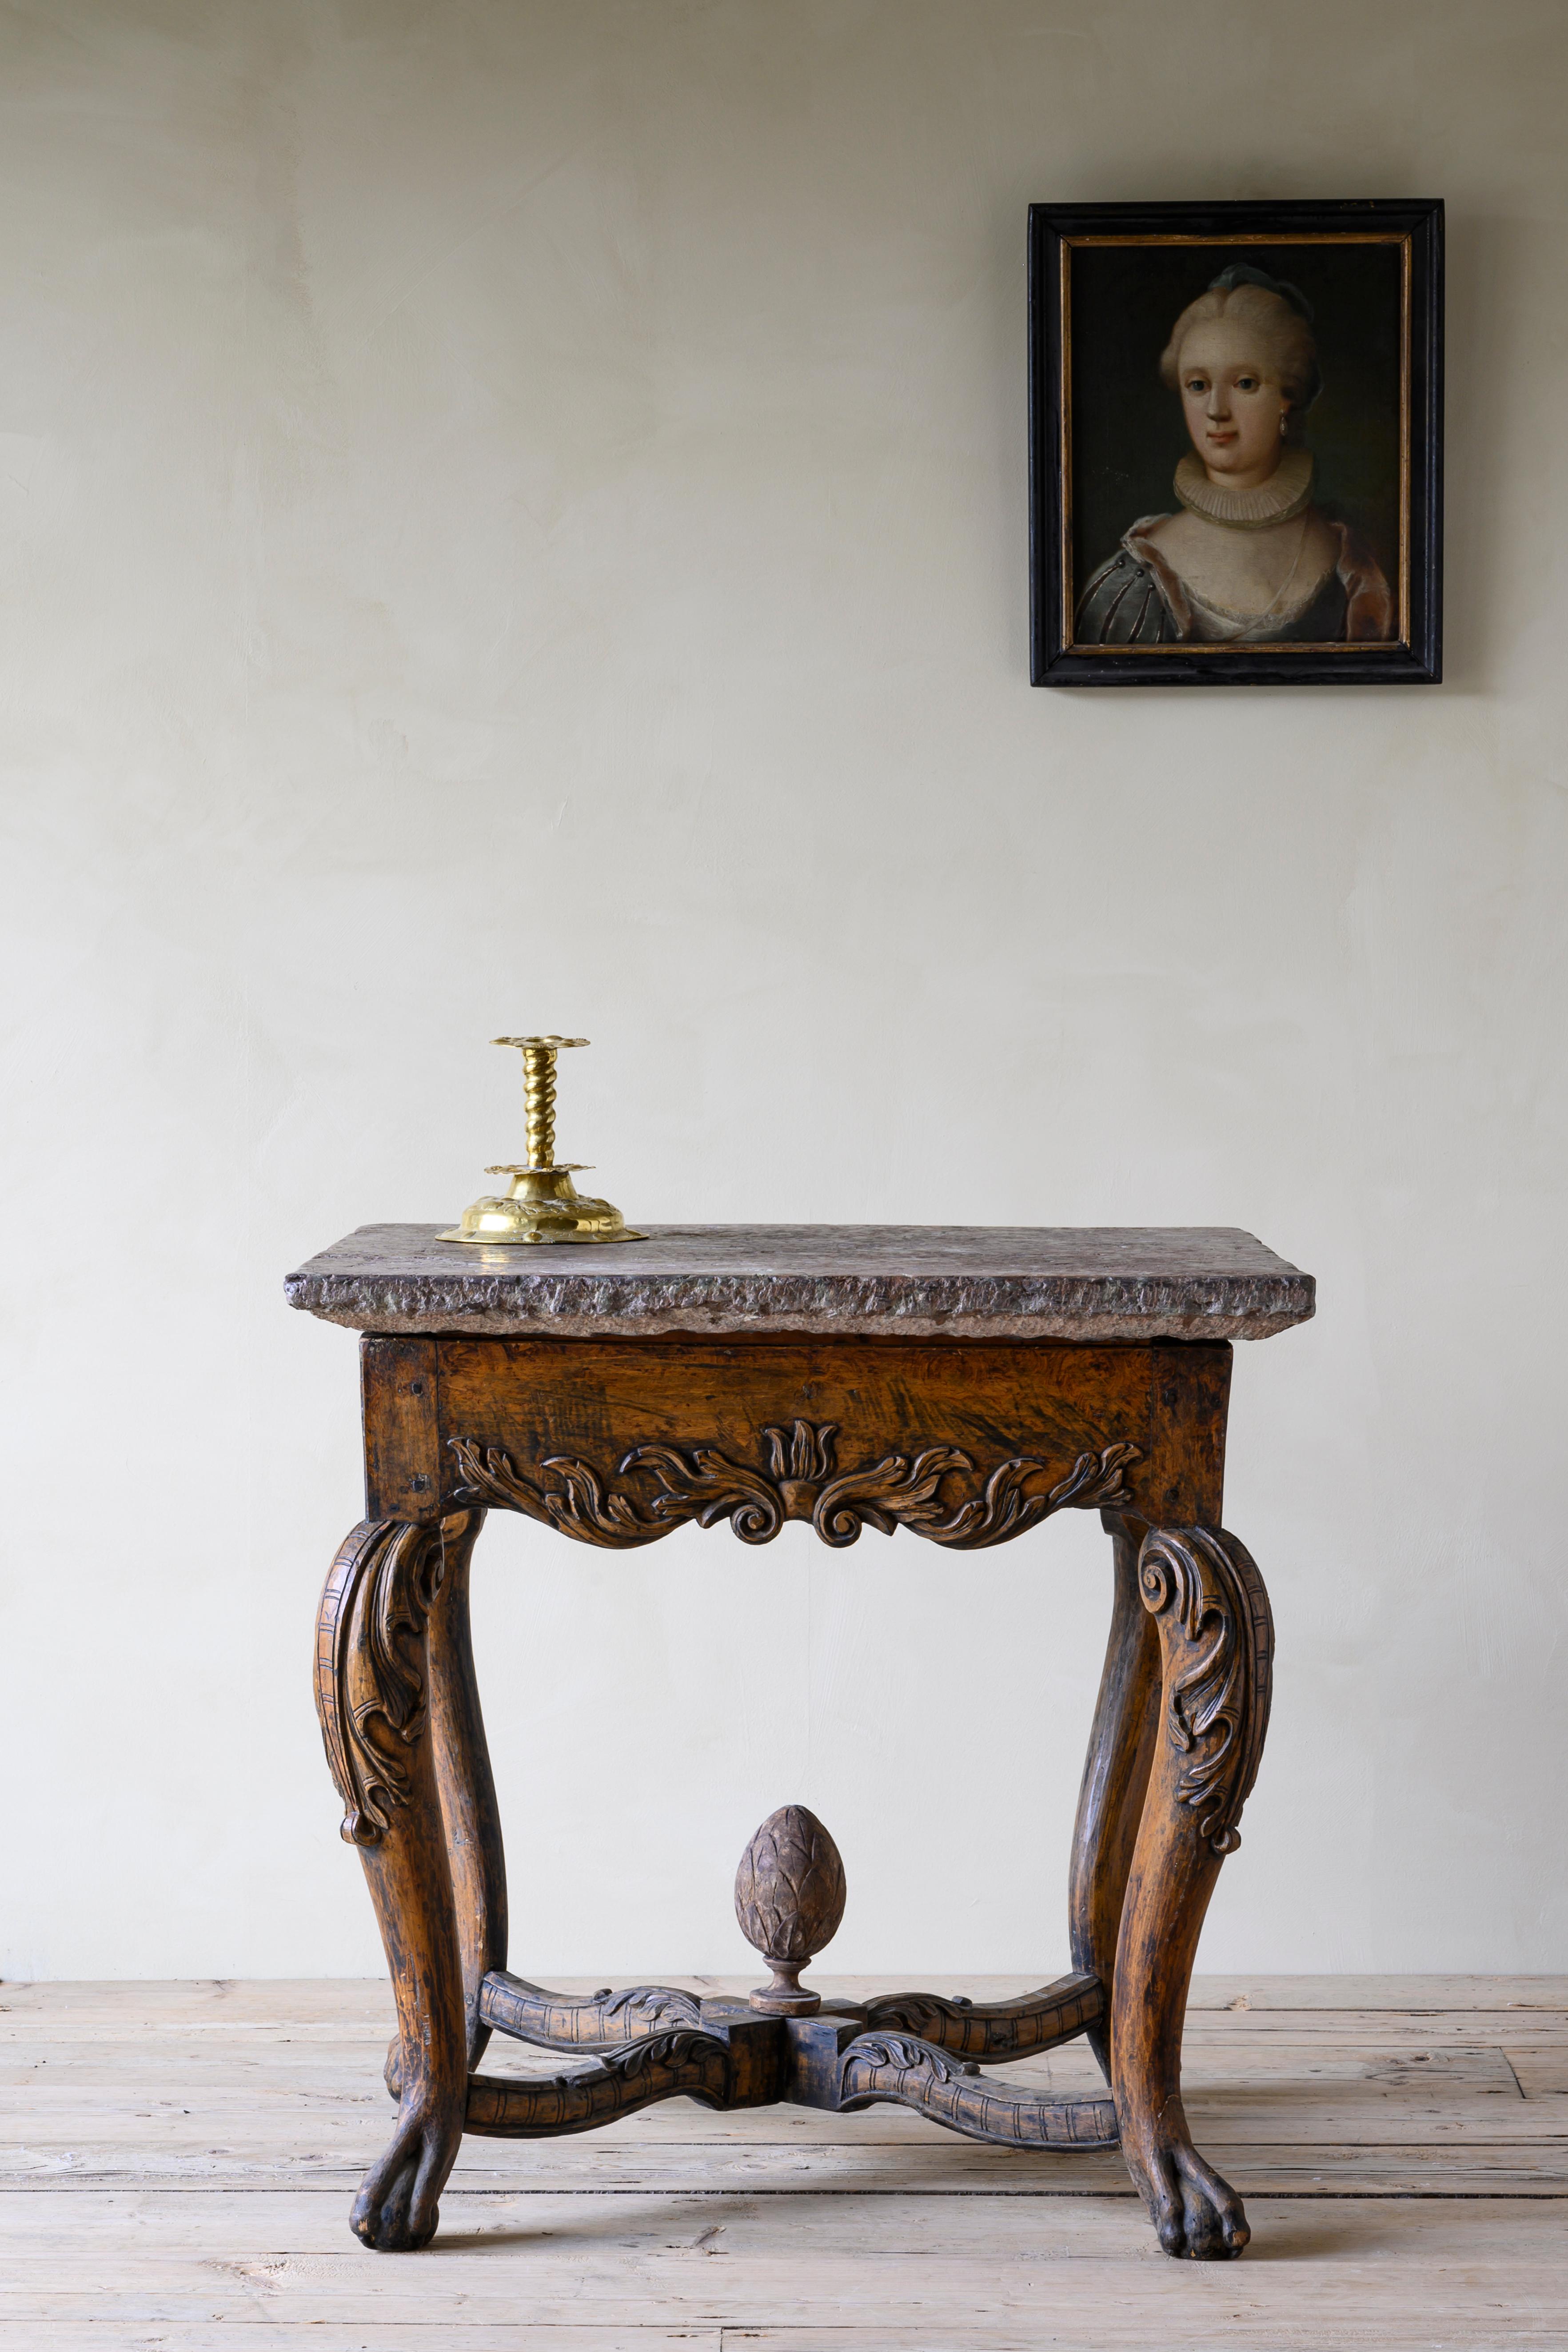 18th century Baroque stone top table with good proportions and fine carvings, North Europe / Scandinavia, circa 1740.

Good condition with wear consistent with age and use. Original finish. Structurally good and sturdy.